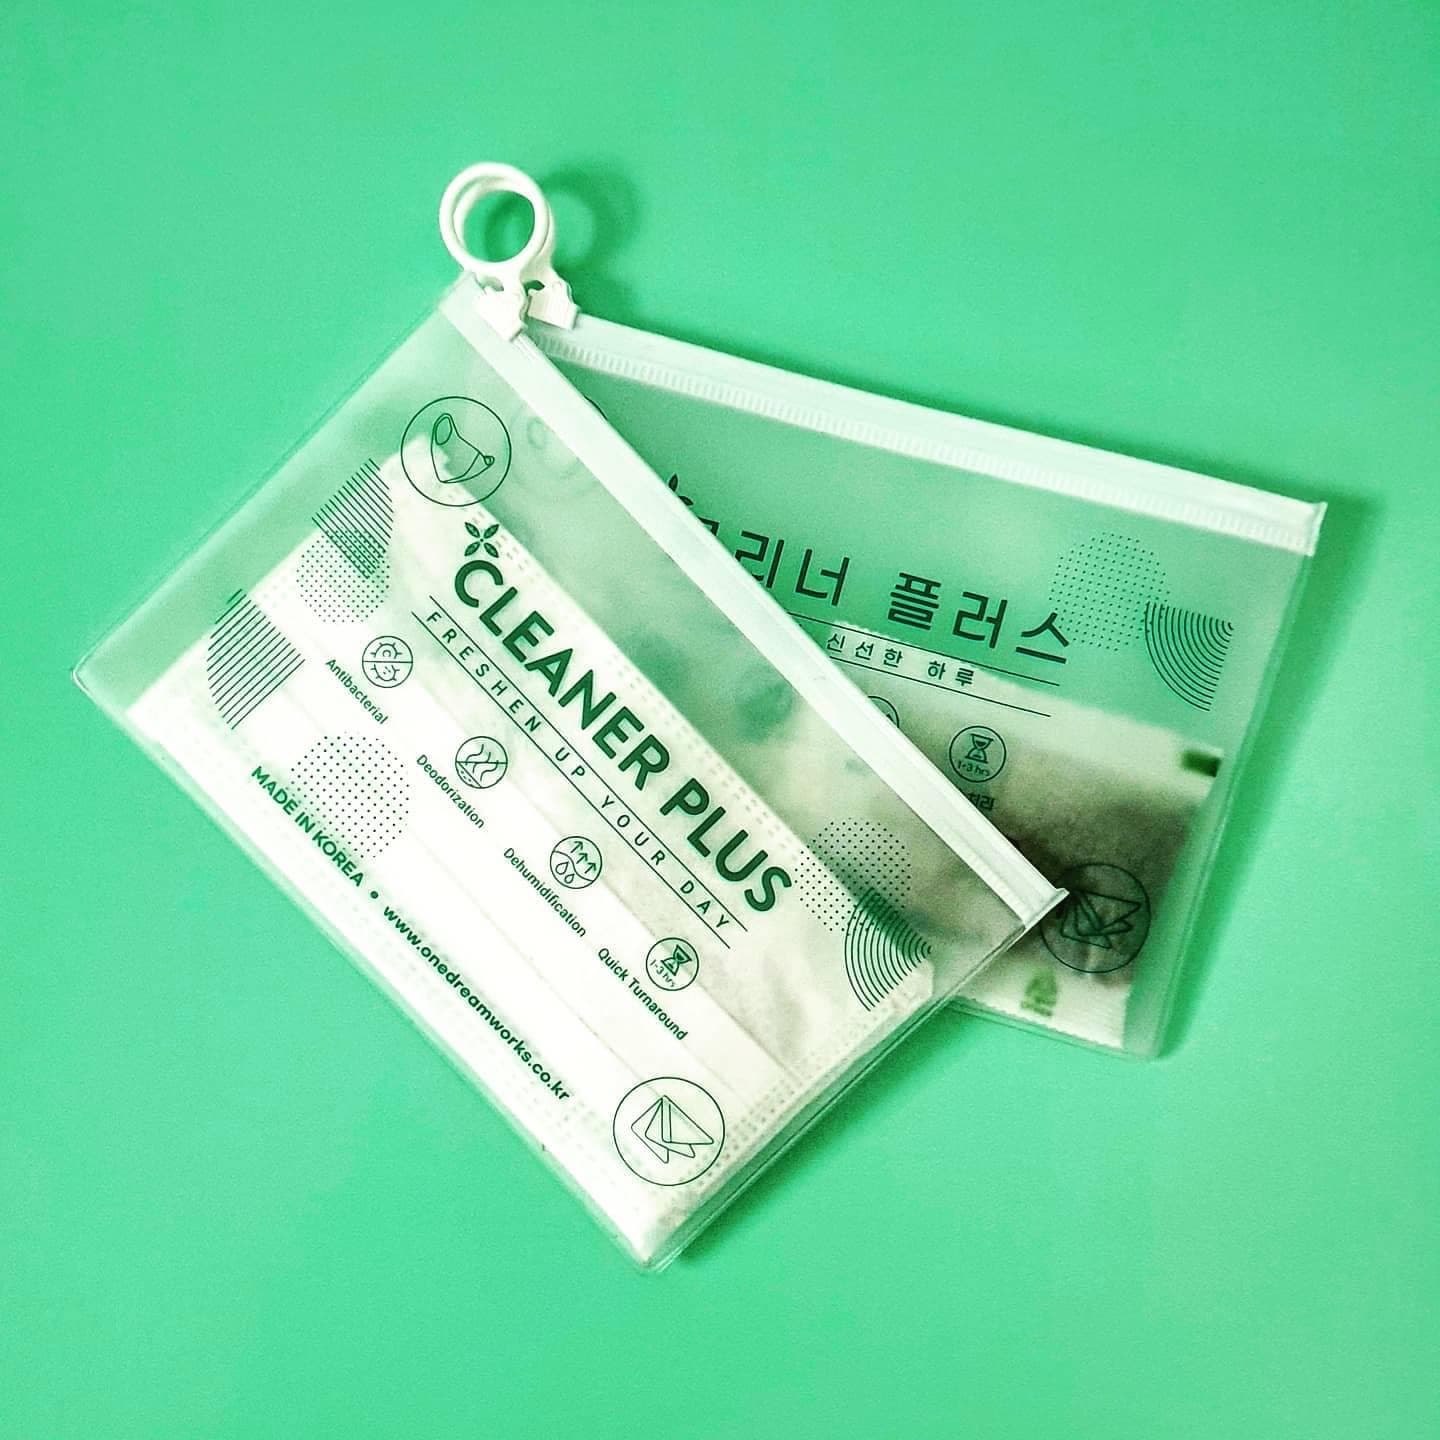 Mask cleaner pouch